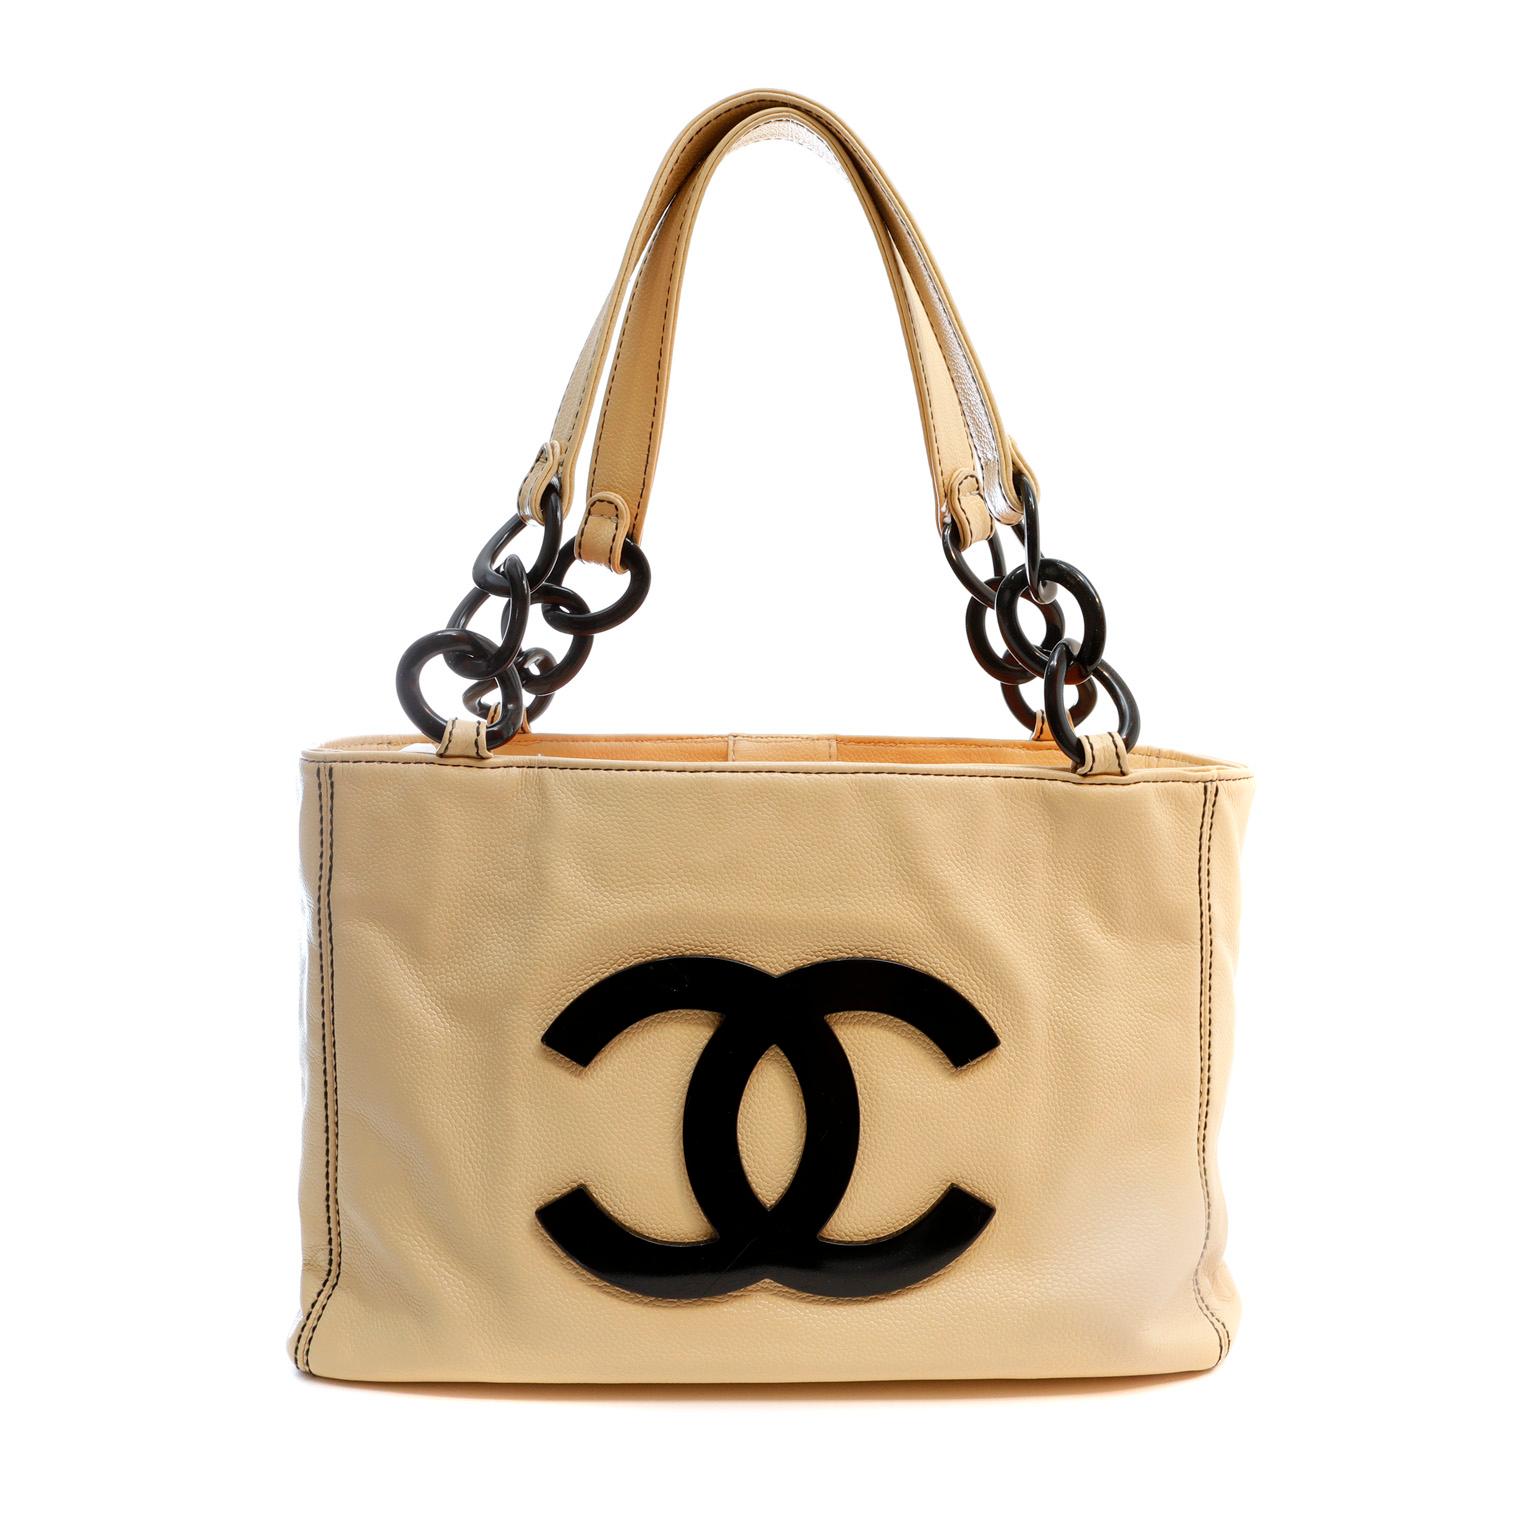 Women's Chanel Beige Caviar and Black Resin CC Tote